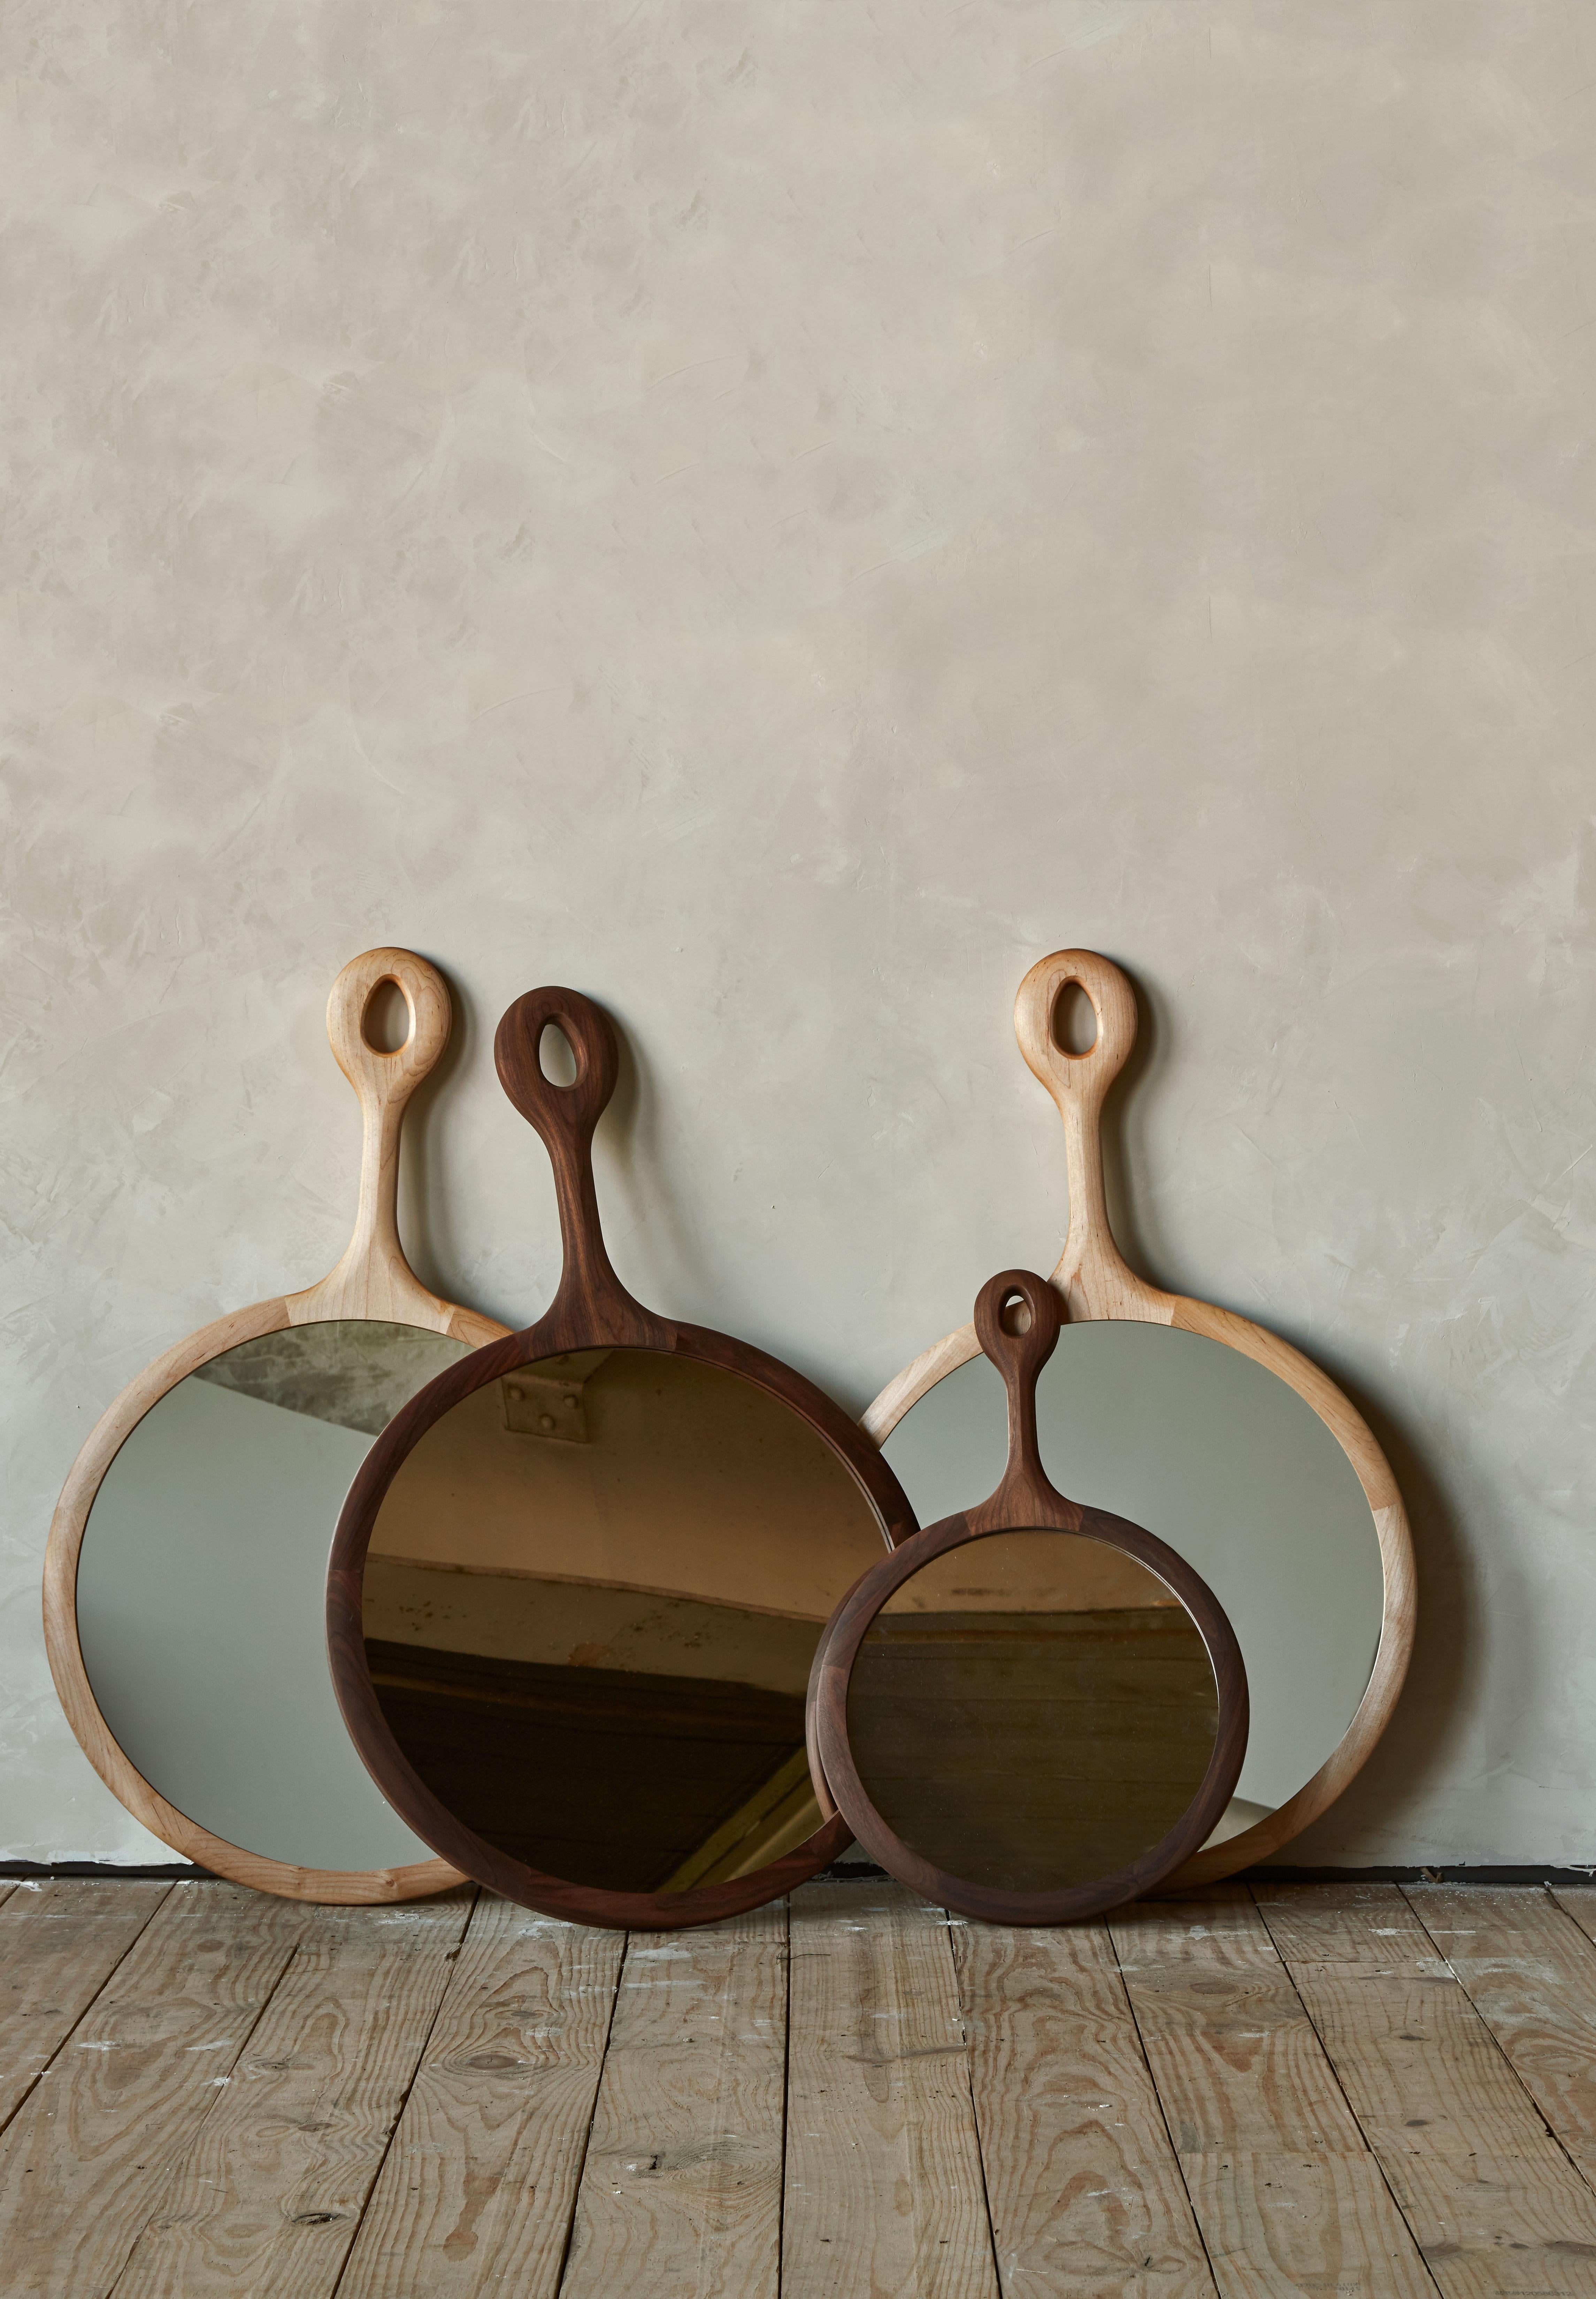 The Sophia Mirror is framed in wooden dark walnut with a long neck resembling an oversized hand mirror. Handcrafted in Pennsylvania, the Sophia comes with a hand-hammered iron peg for hanging. The medium is a lovely size above a dresser or in a